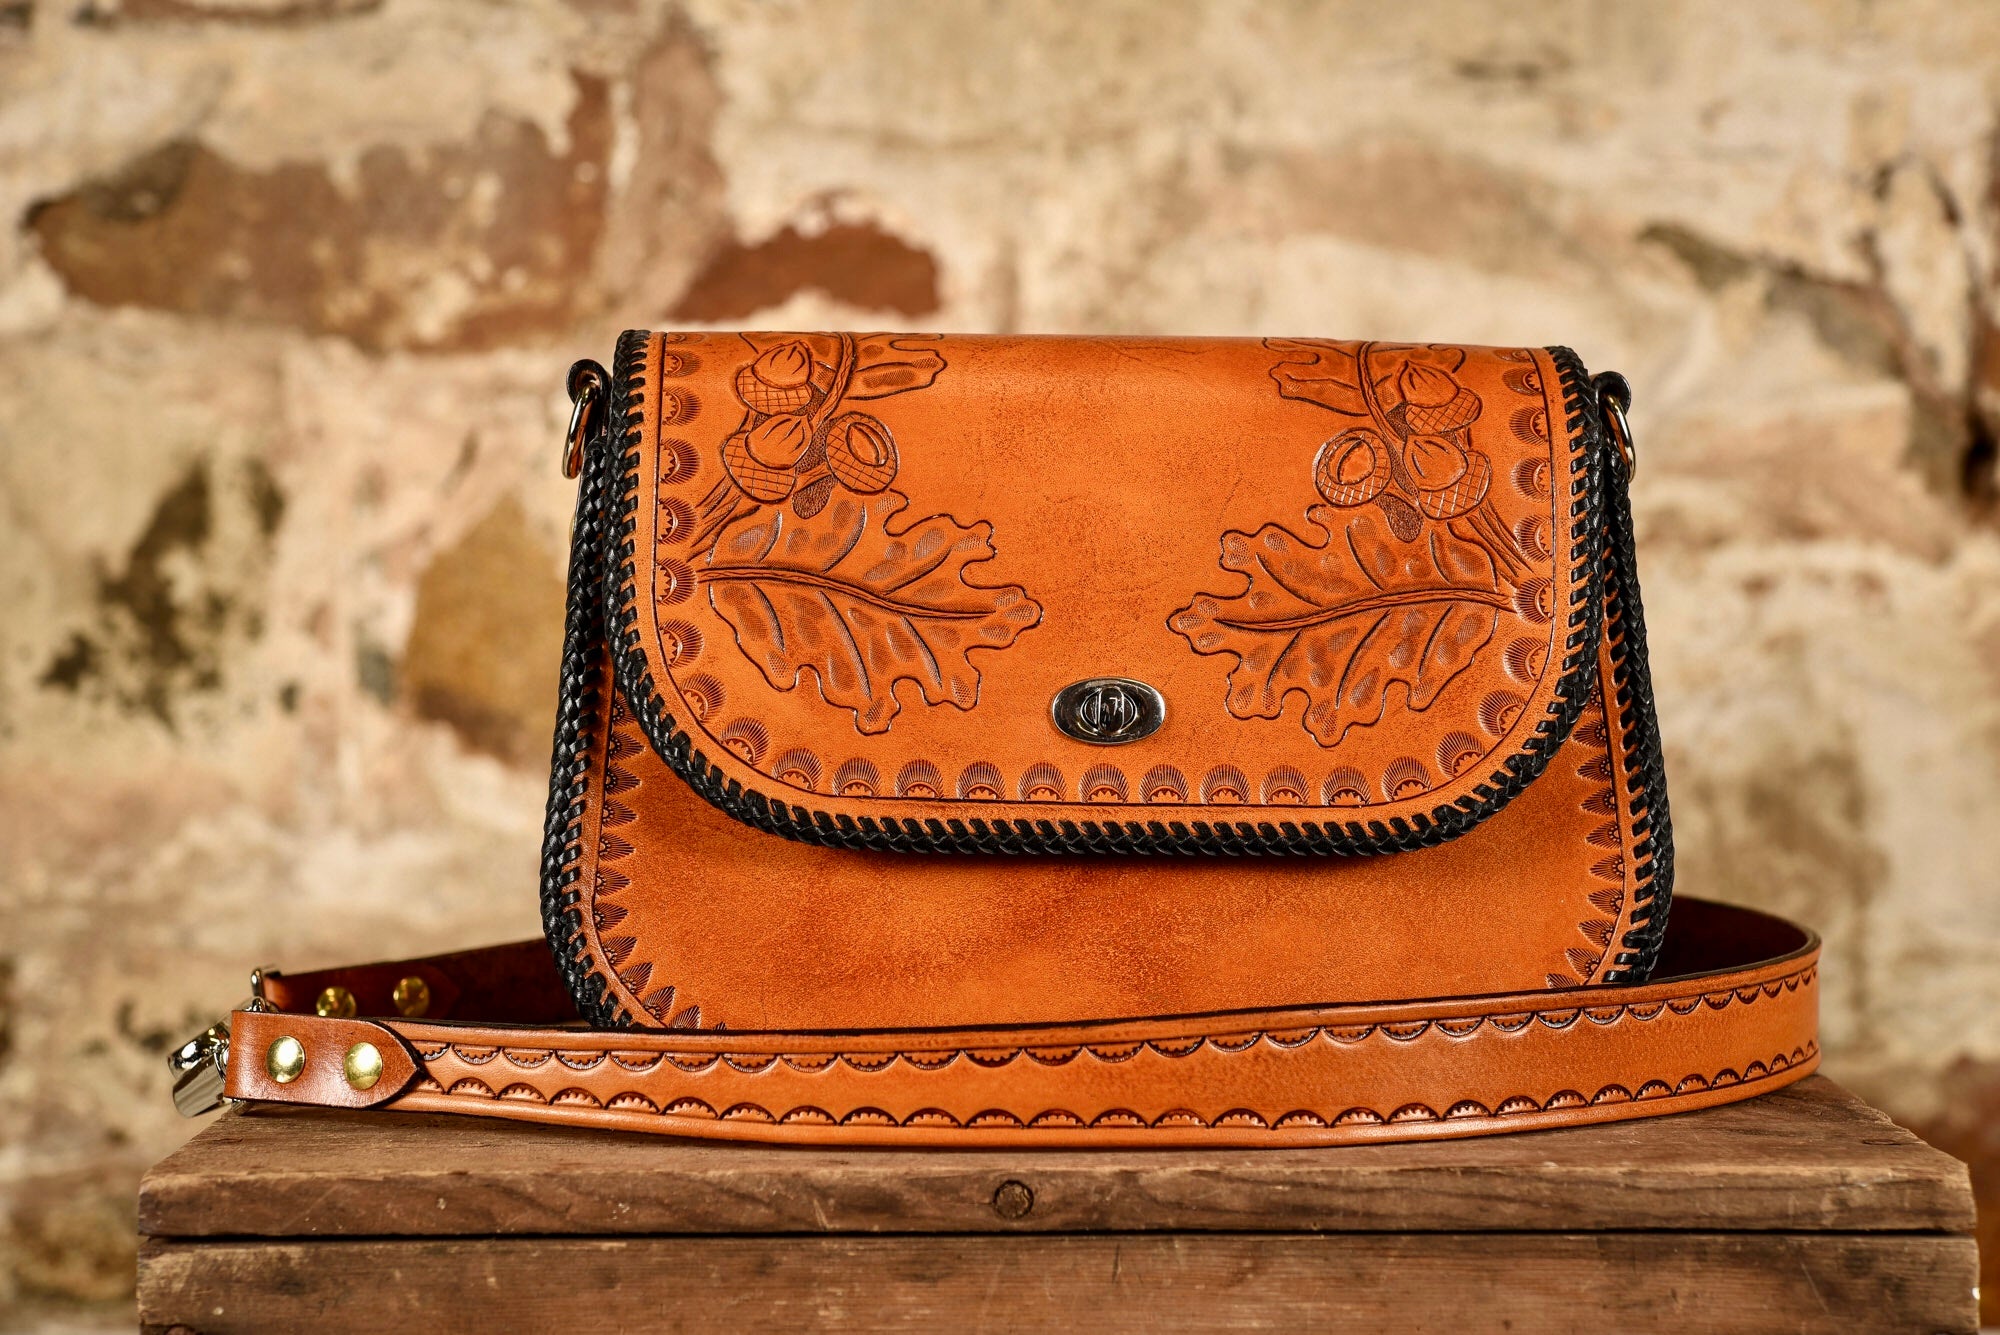 Tooled Leather Clutch, For Industrial, Bi- Fold at Rs 1200 in Kanpur